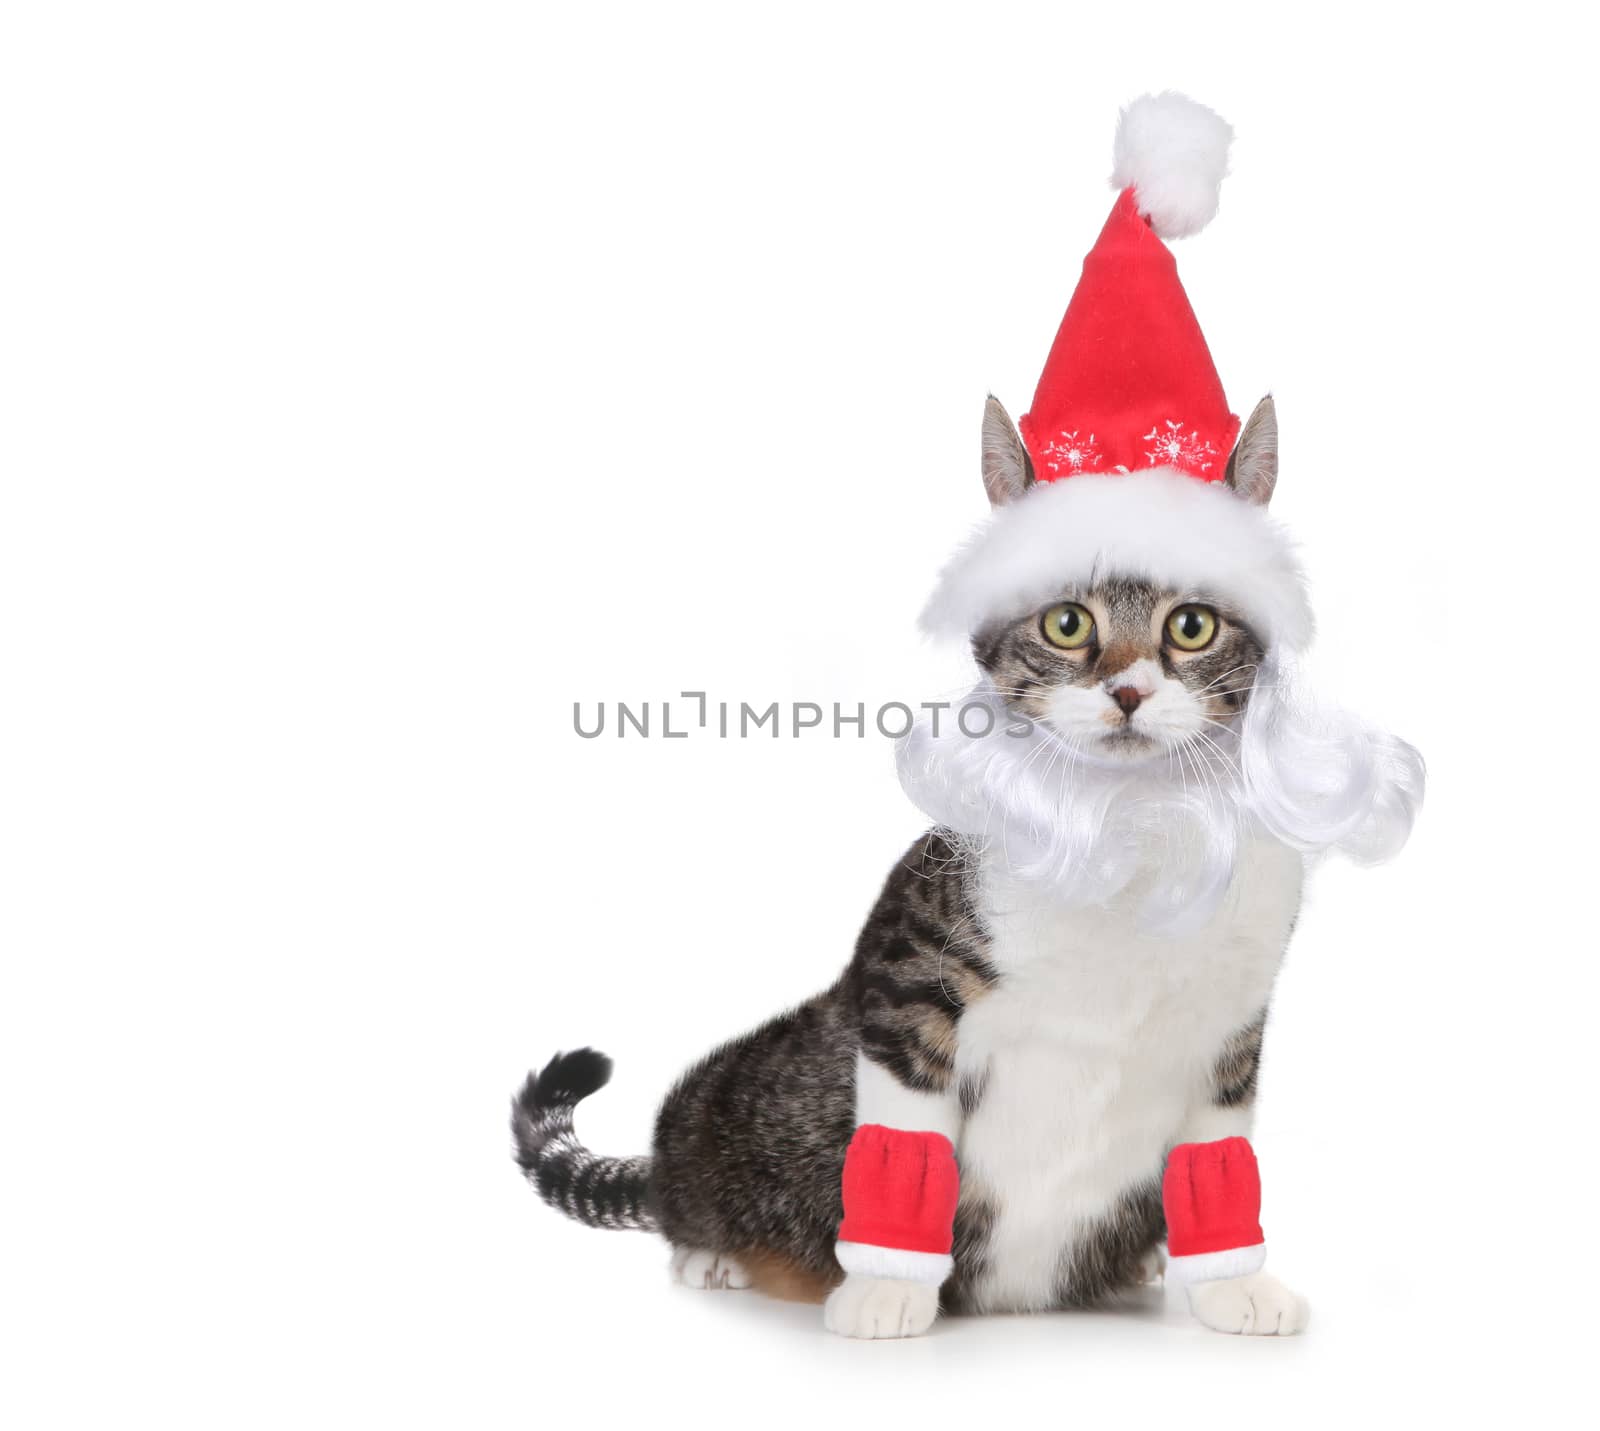 Humorous Cat Wearing a Santa Claus Hat and Beard on White